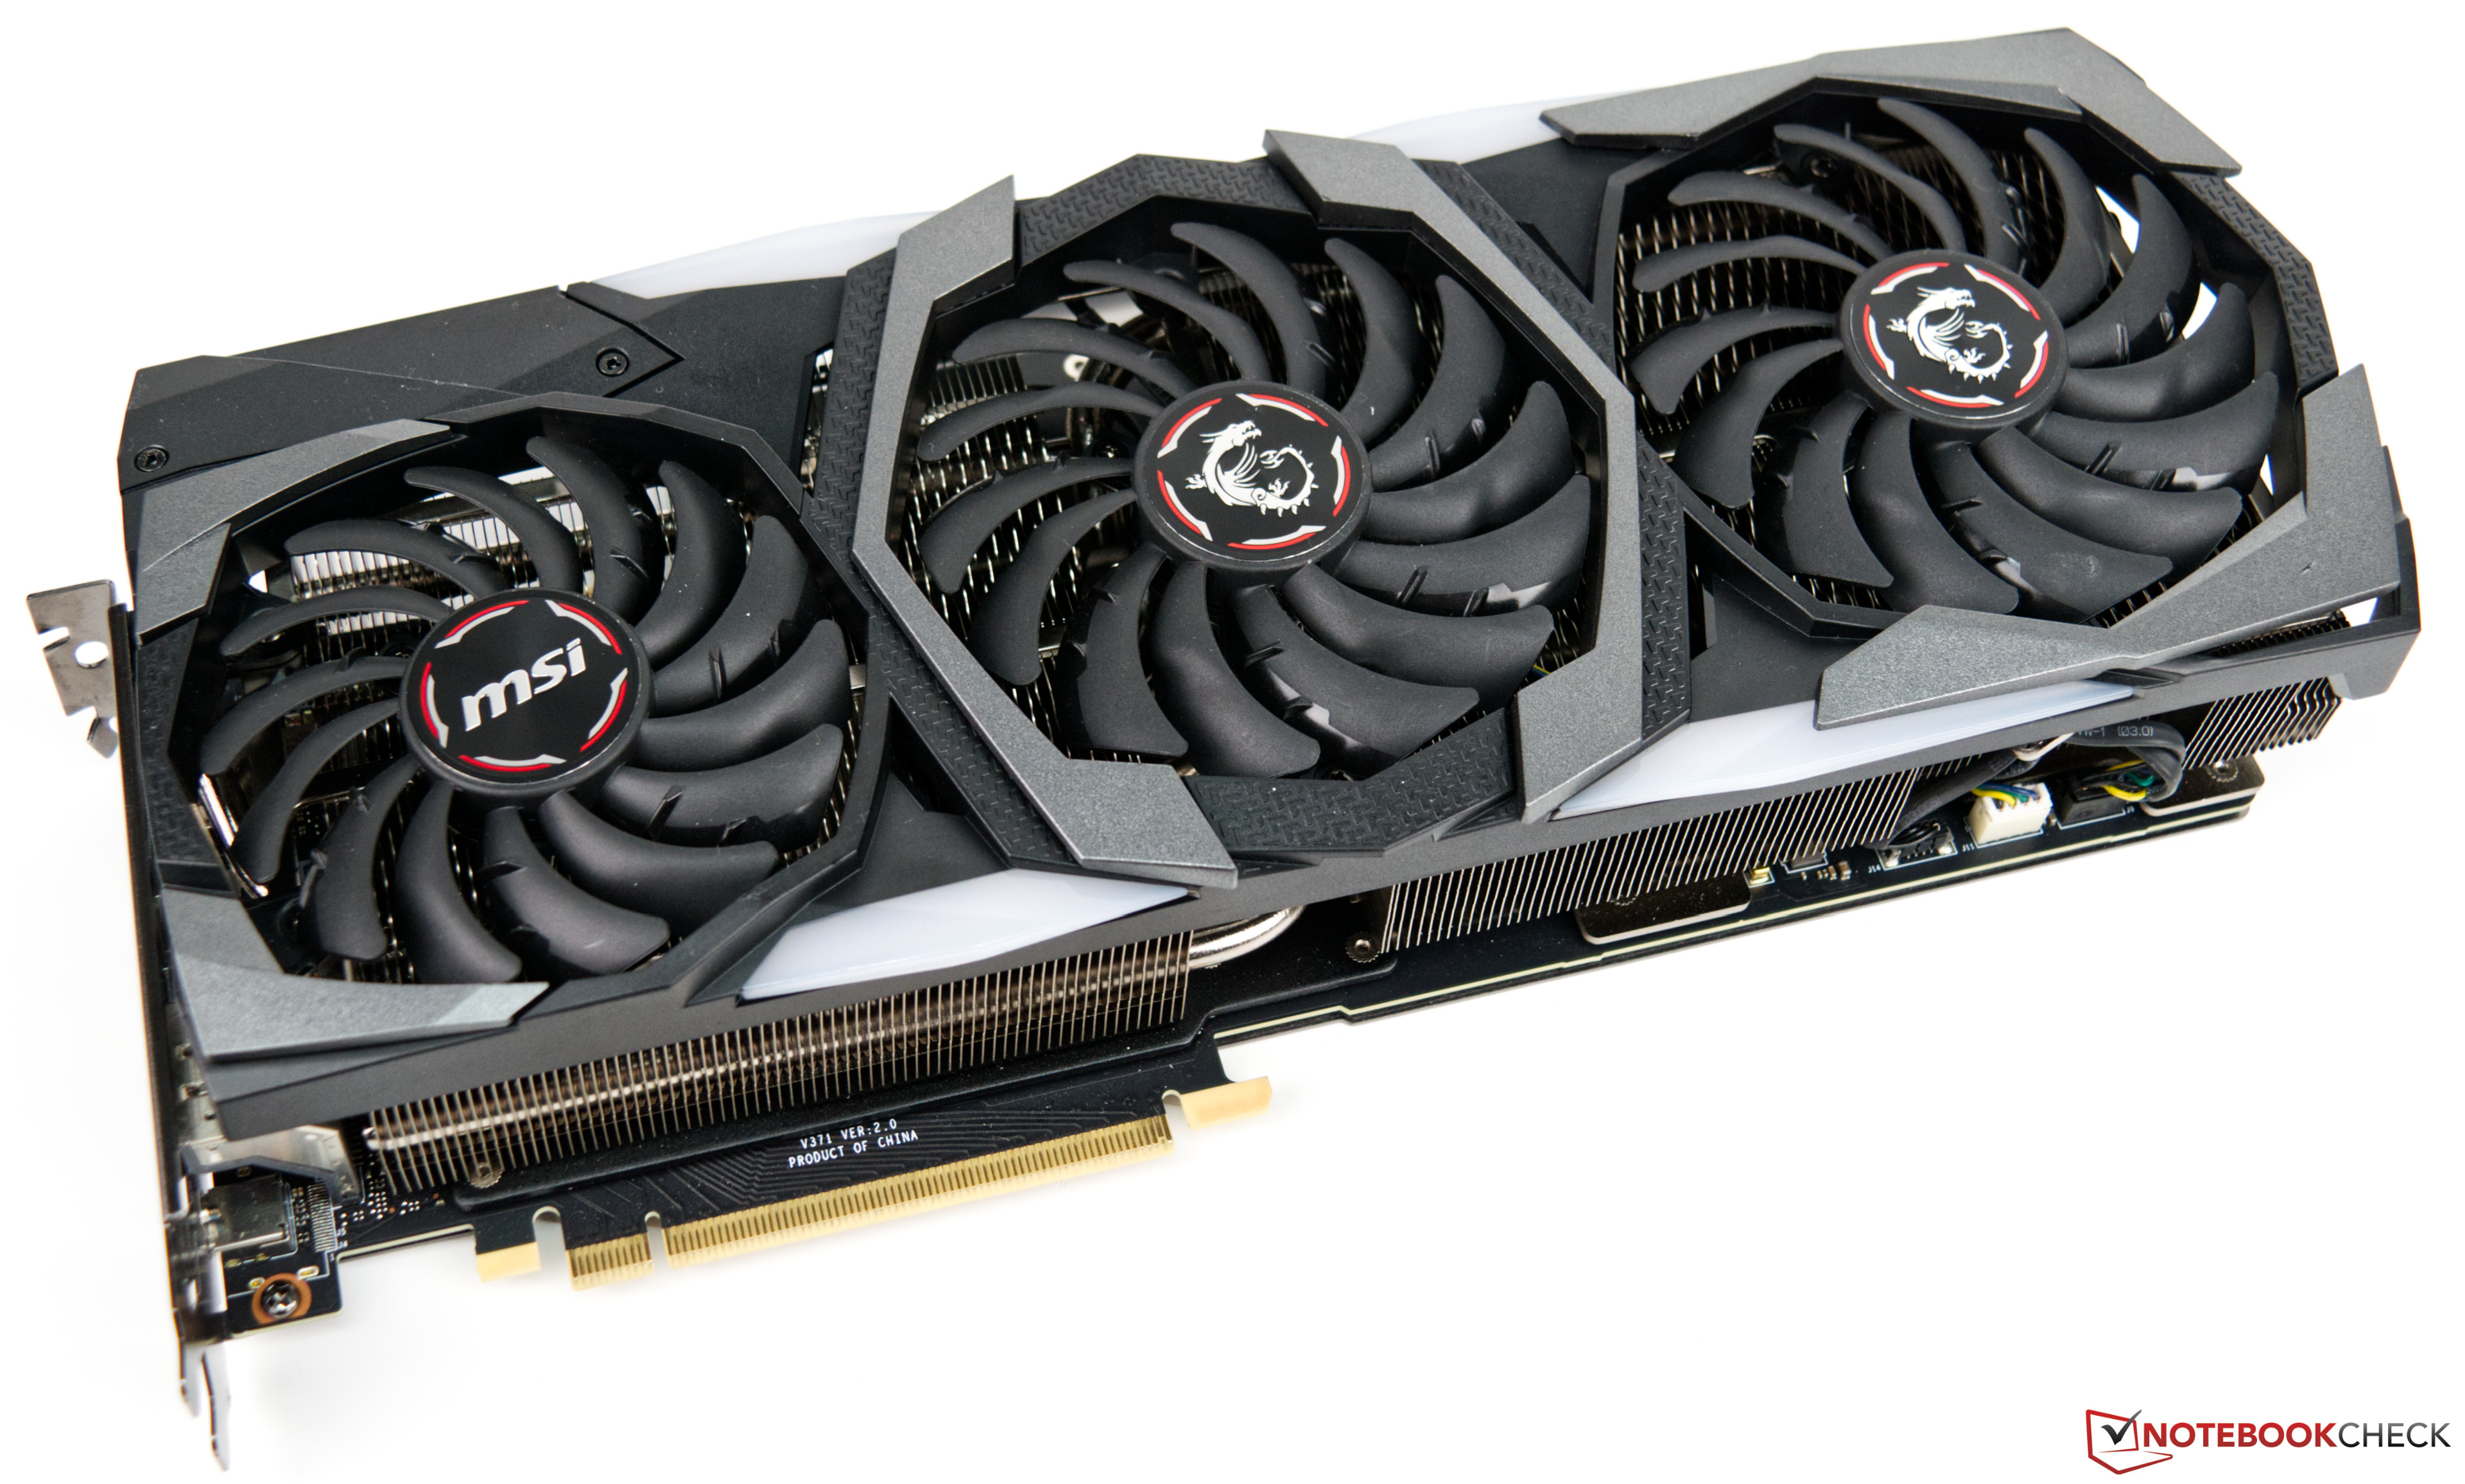 Msi Geforce Rtx 80 Ti Gaming X Trio Desktop Gpu Review The Fastest Geforce Graphics Card Around Notebookcheck Net Reviews